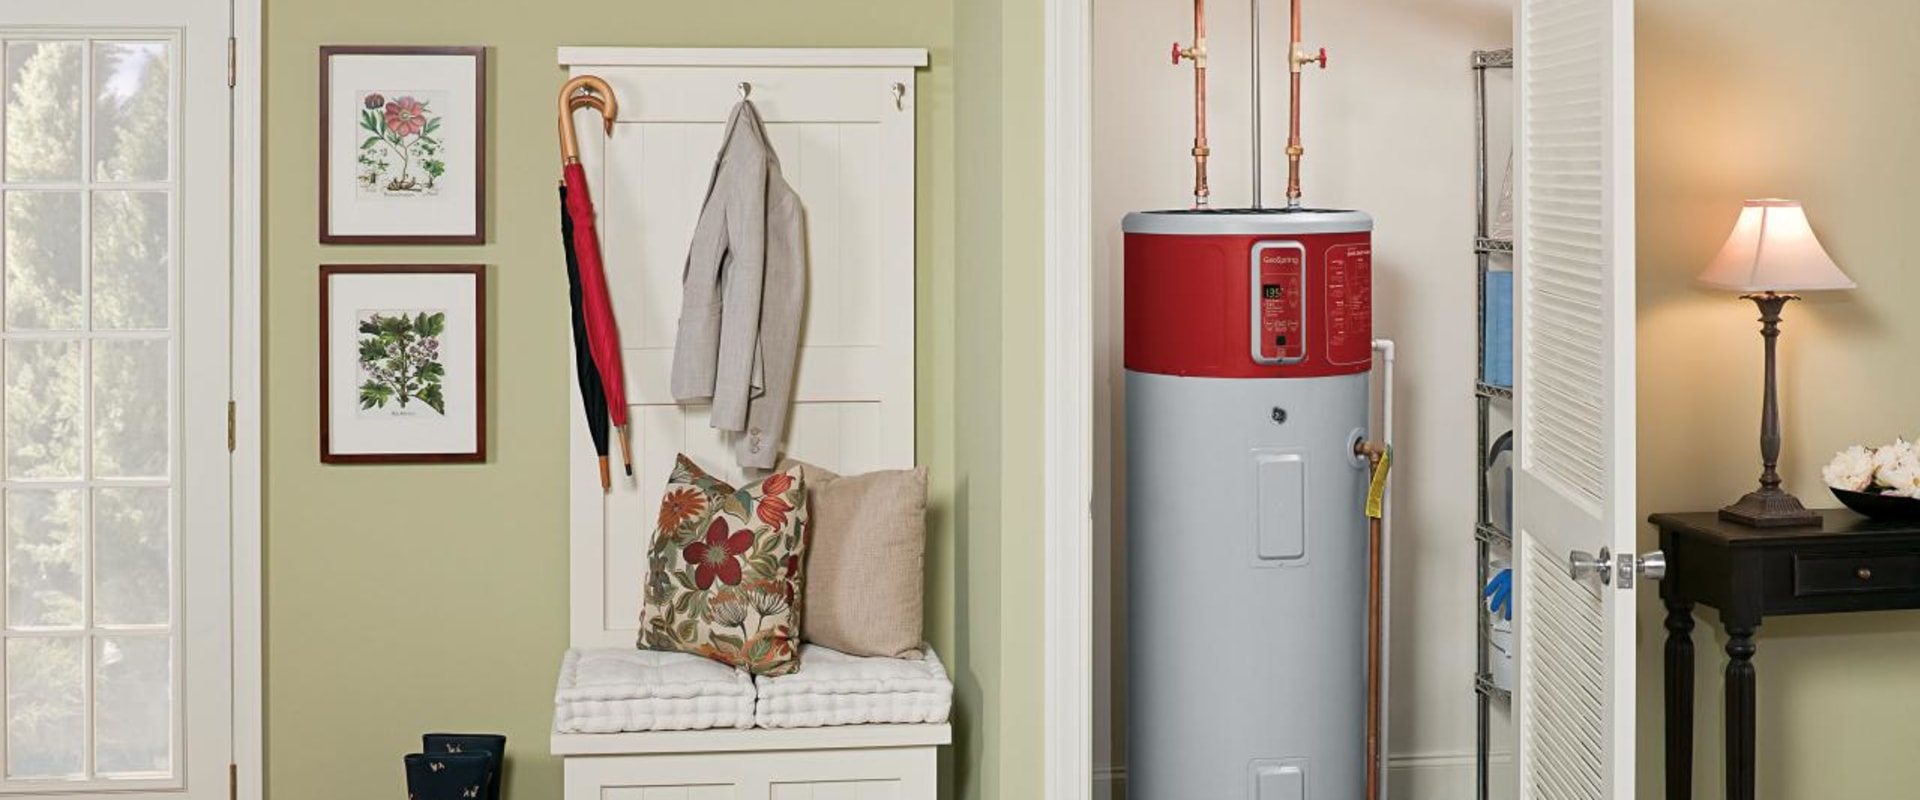 What is the most efficient electric hot water system?